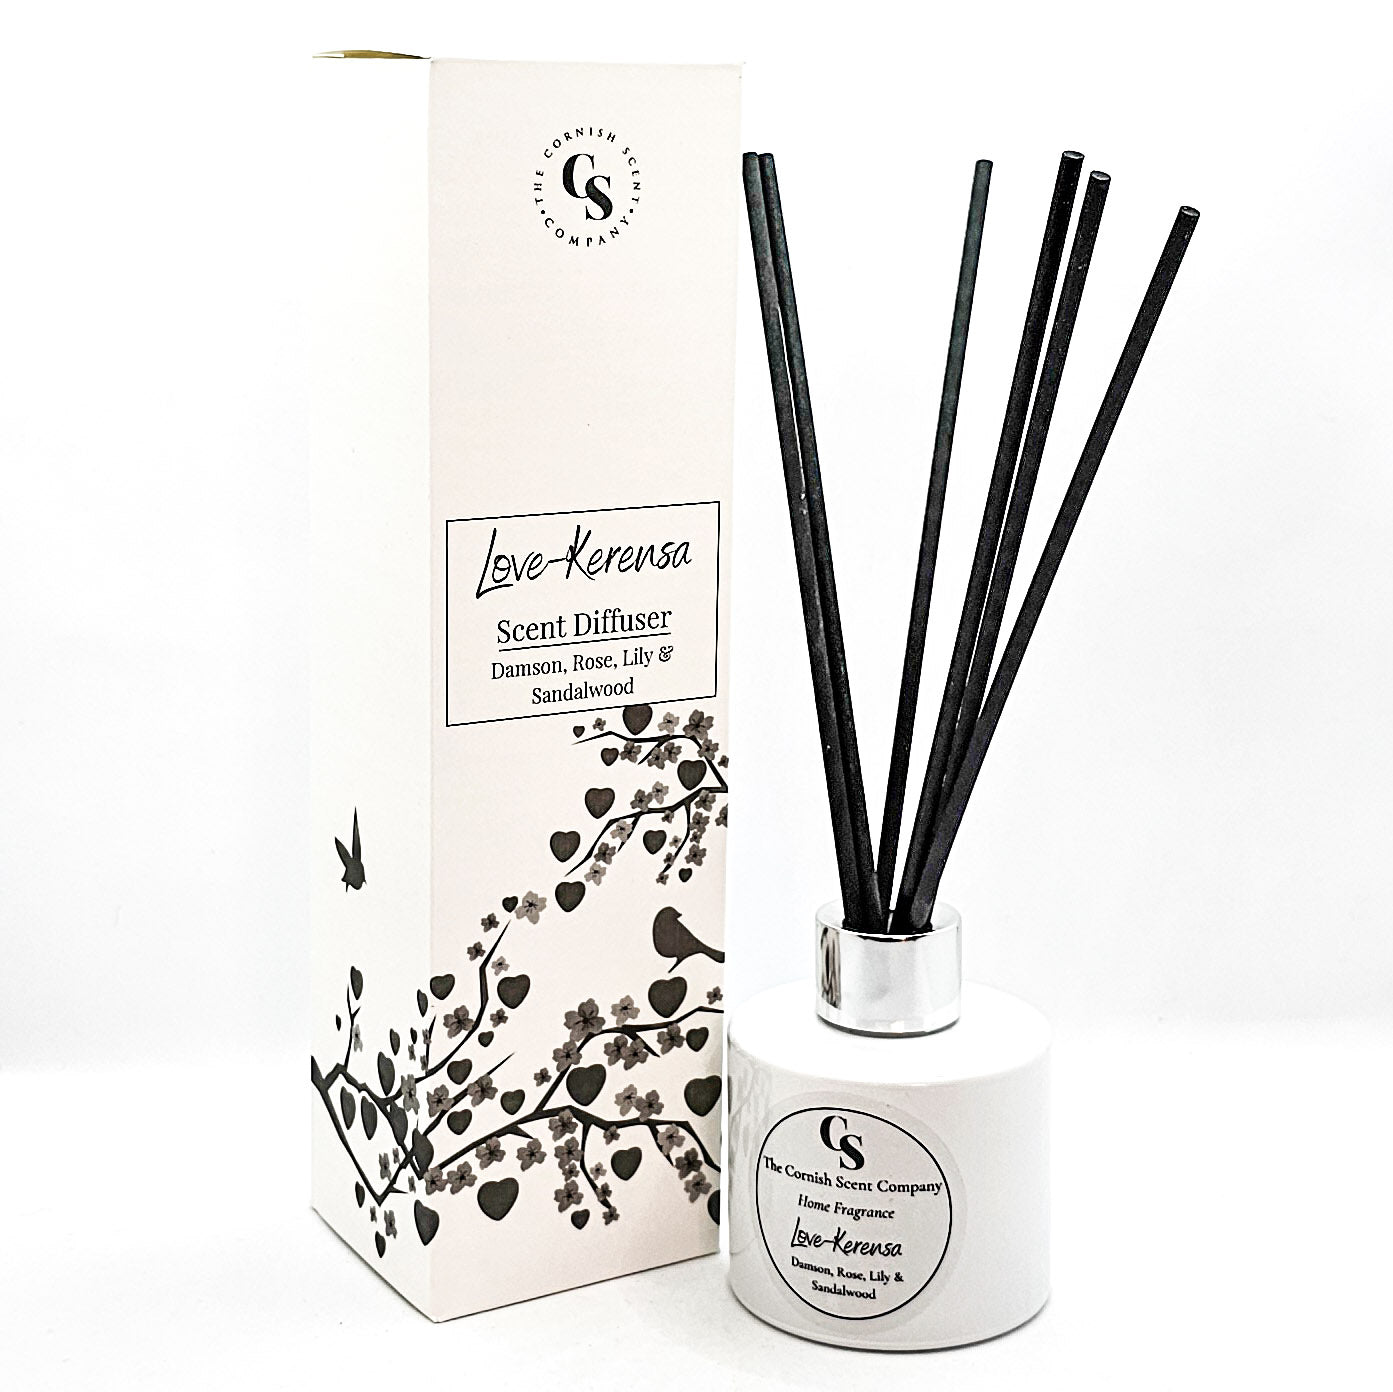 luxury reed diffuser 